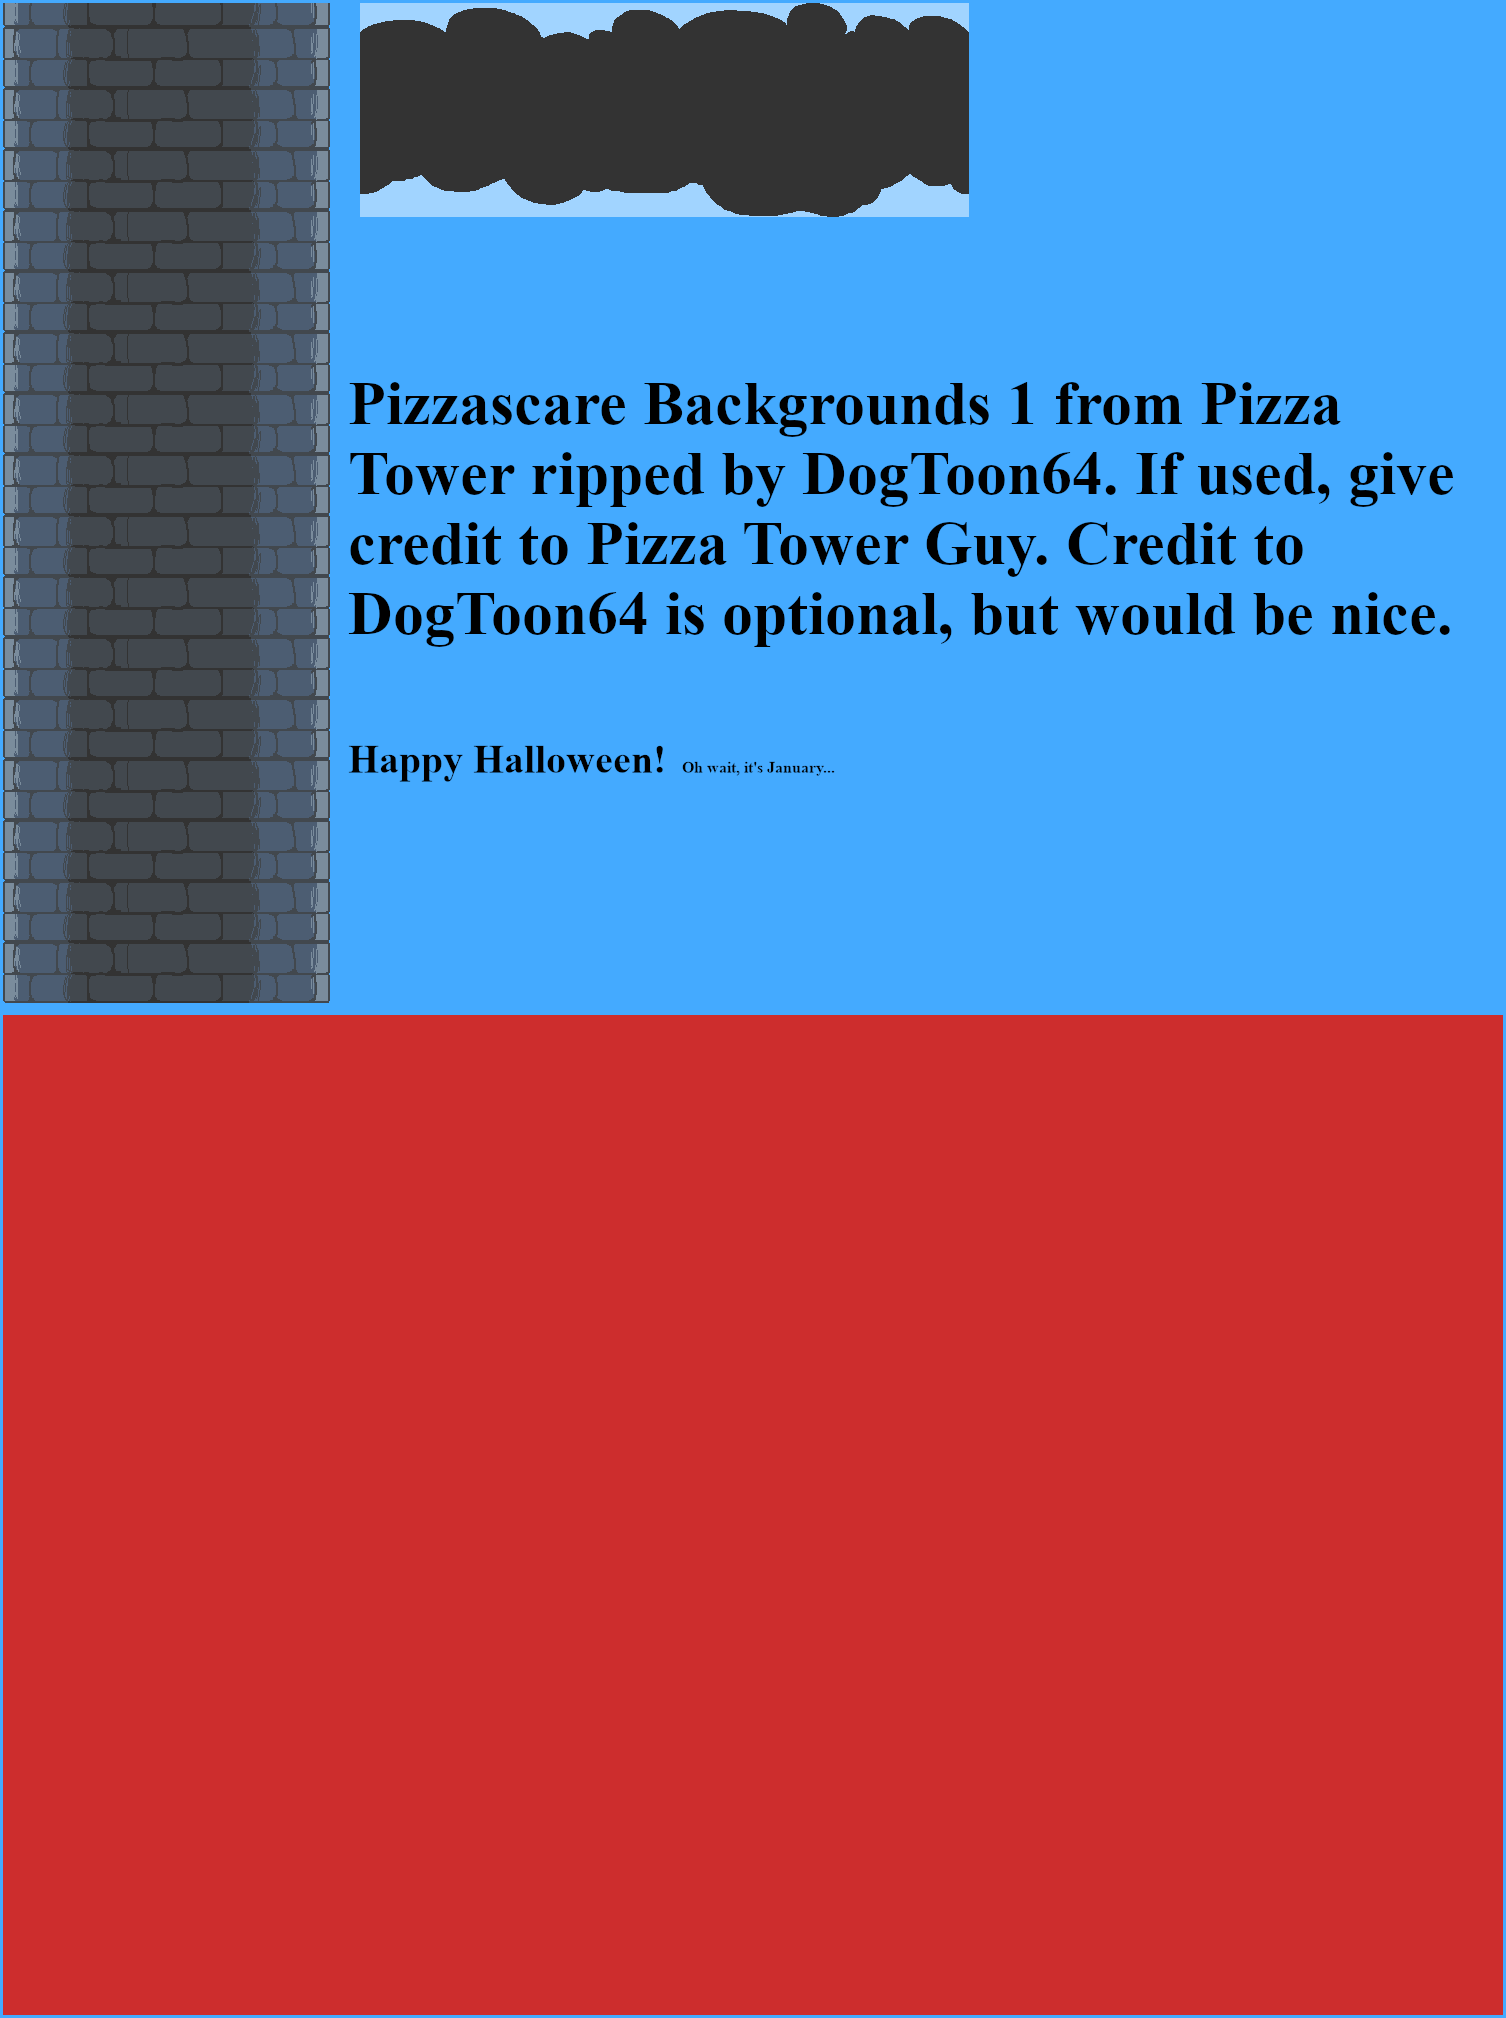 Pizzascare, Pizza Tower Wiki